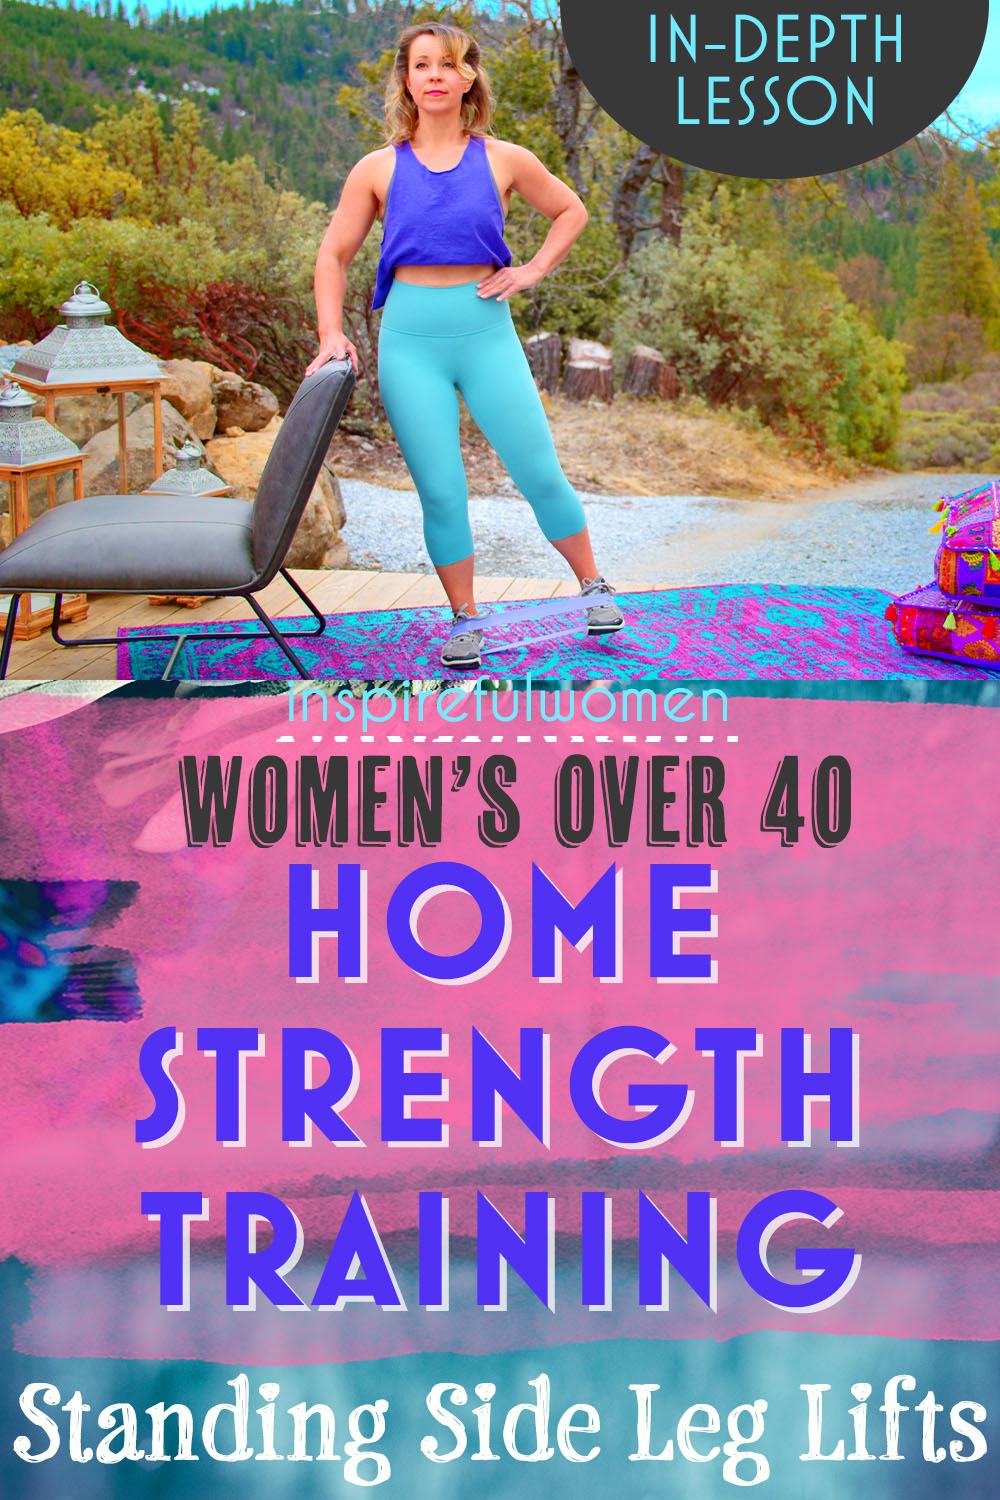 standing-side-leg-raises-resistance-band-glutes-home-strength-training-women-over-40